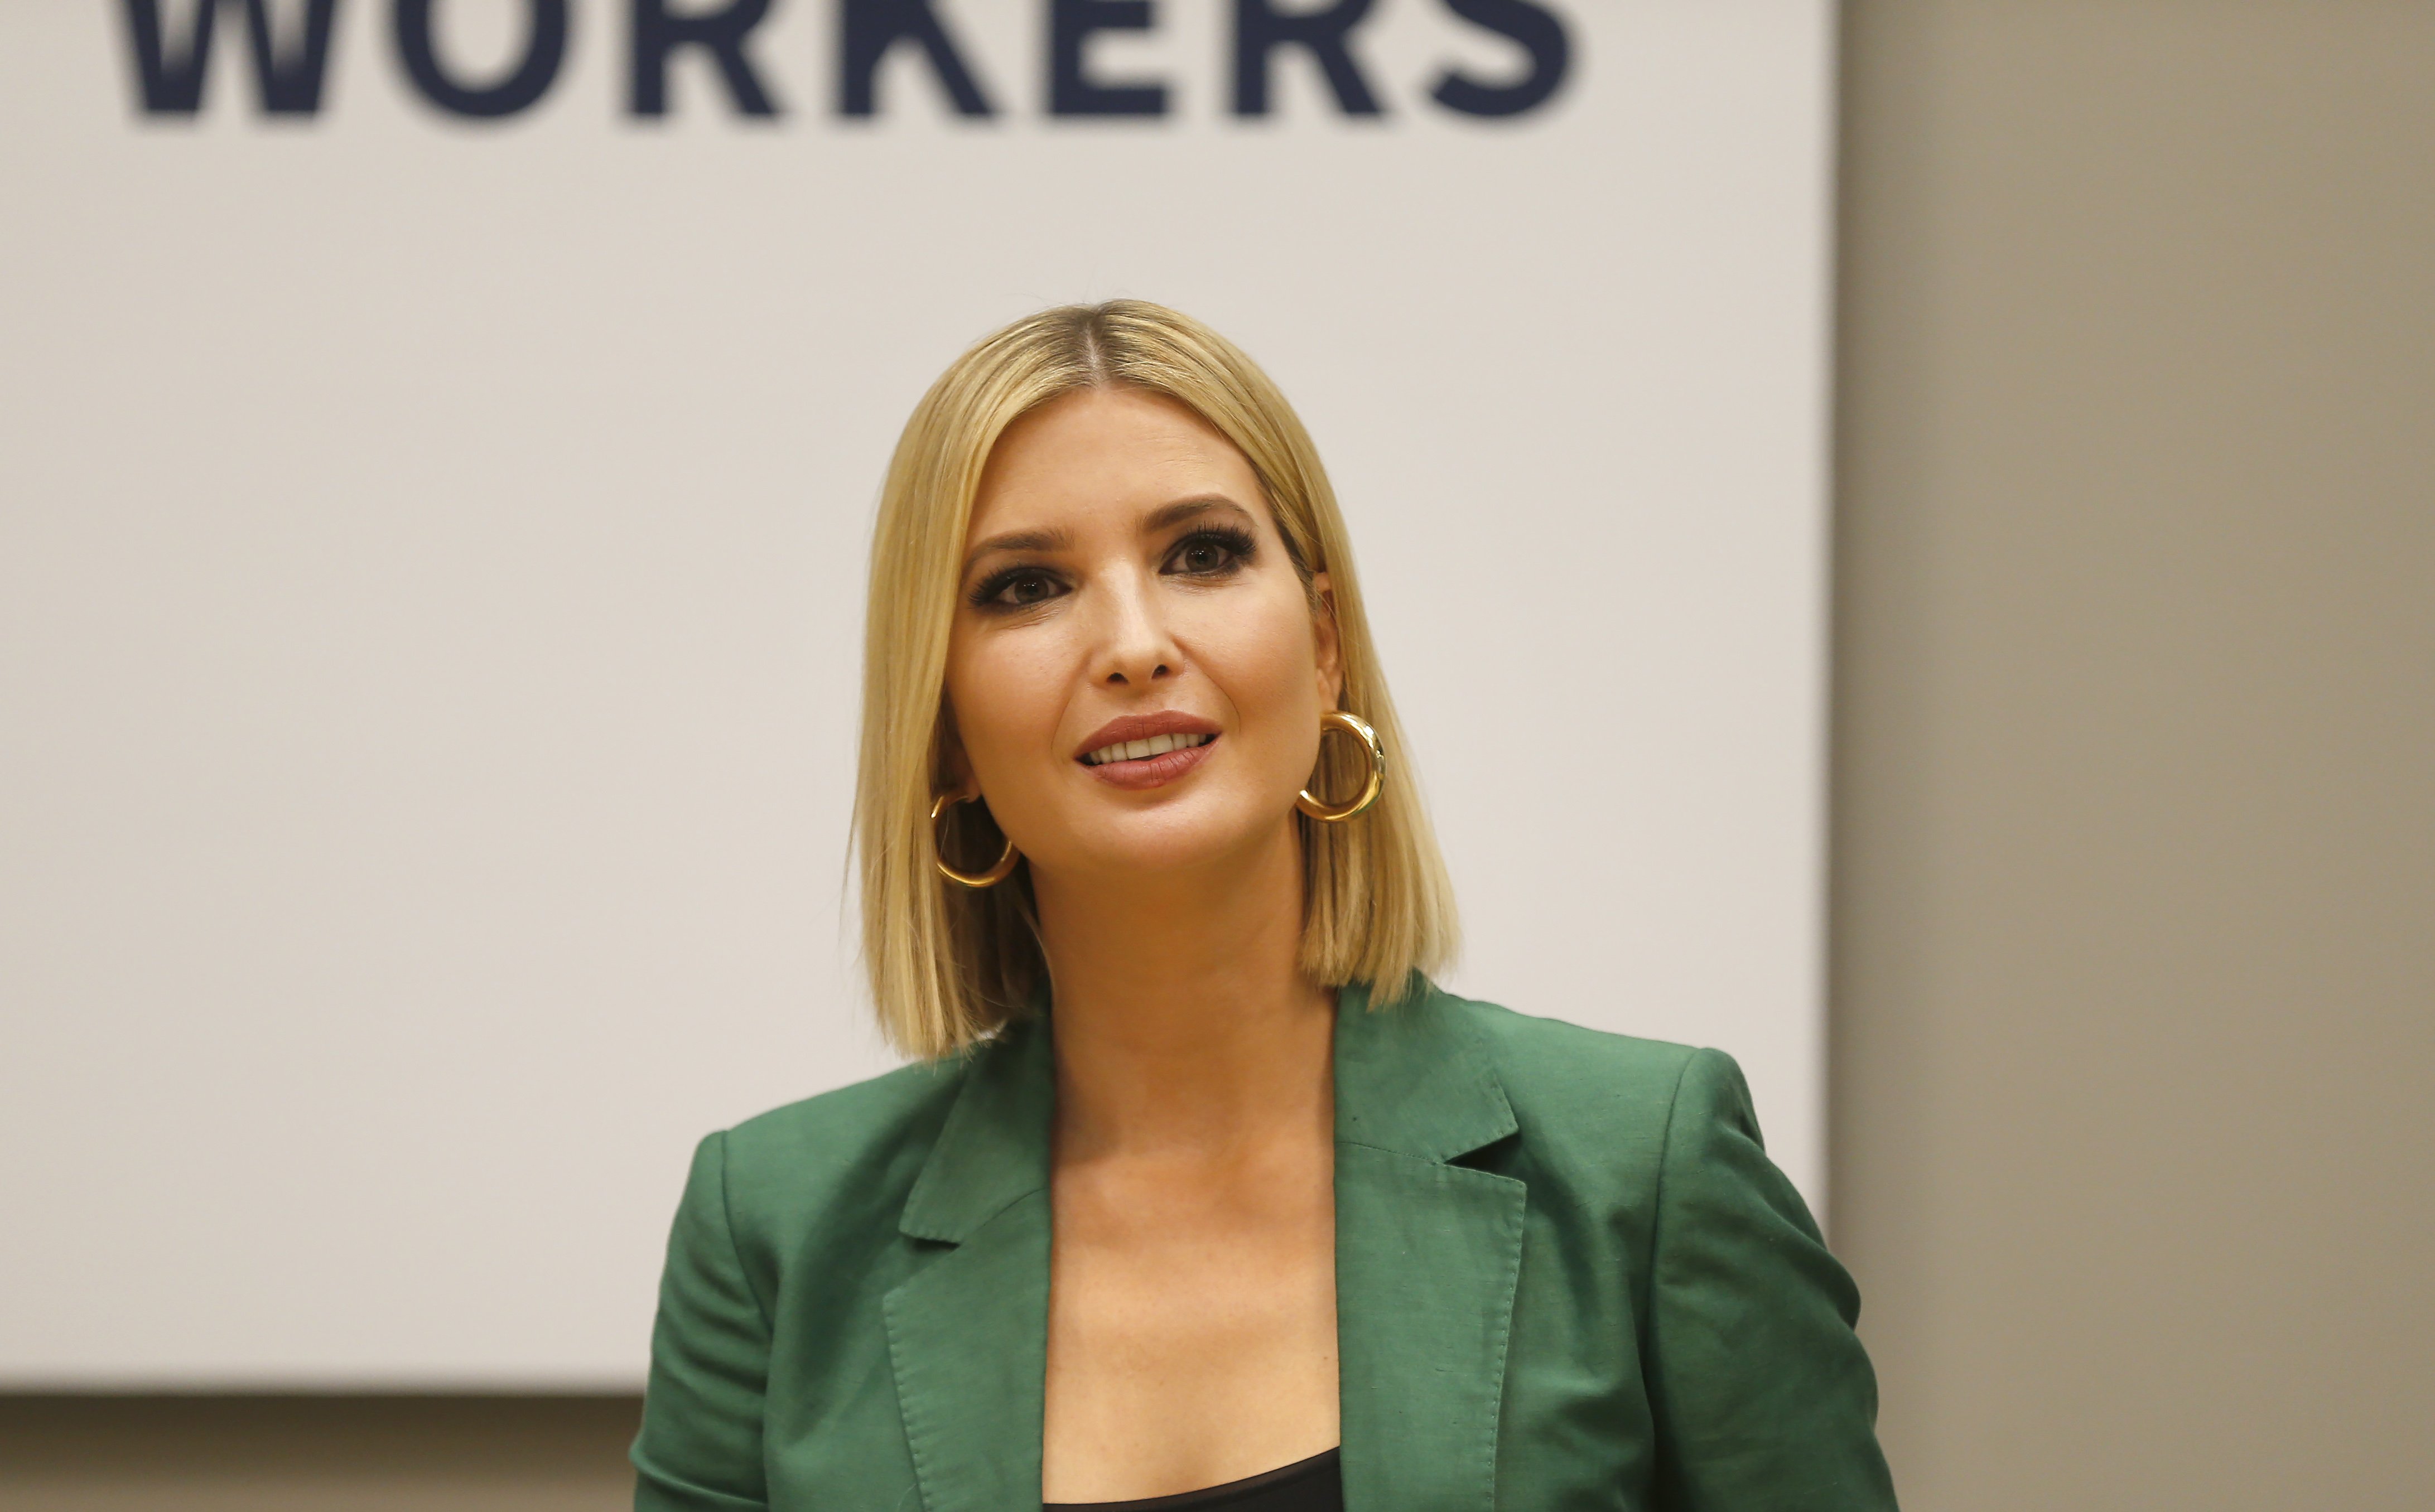 White House advisor Ivanka Trump speaks during a roundtable discussion focusing on assisting American workers for the changing economy at El Centro community college on October 3, 2019 | Photo: Getty Images